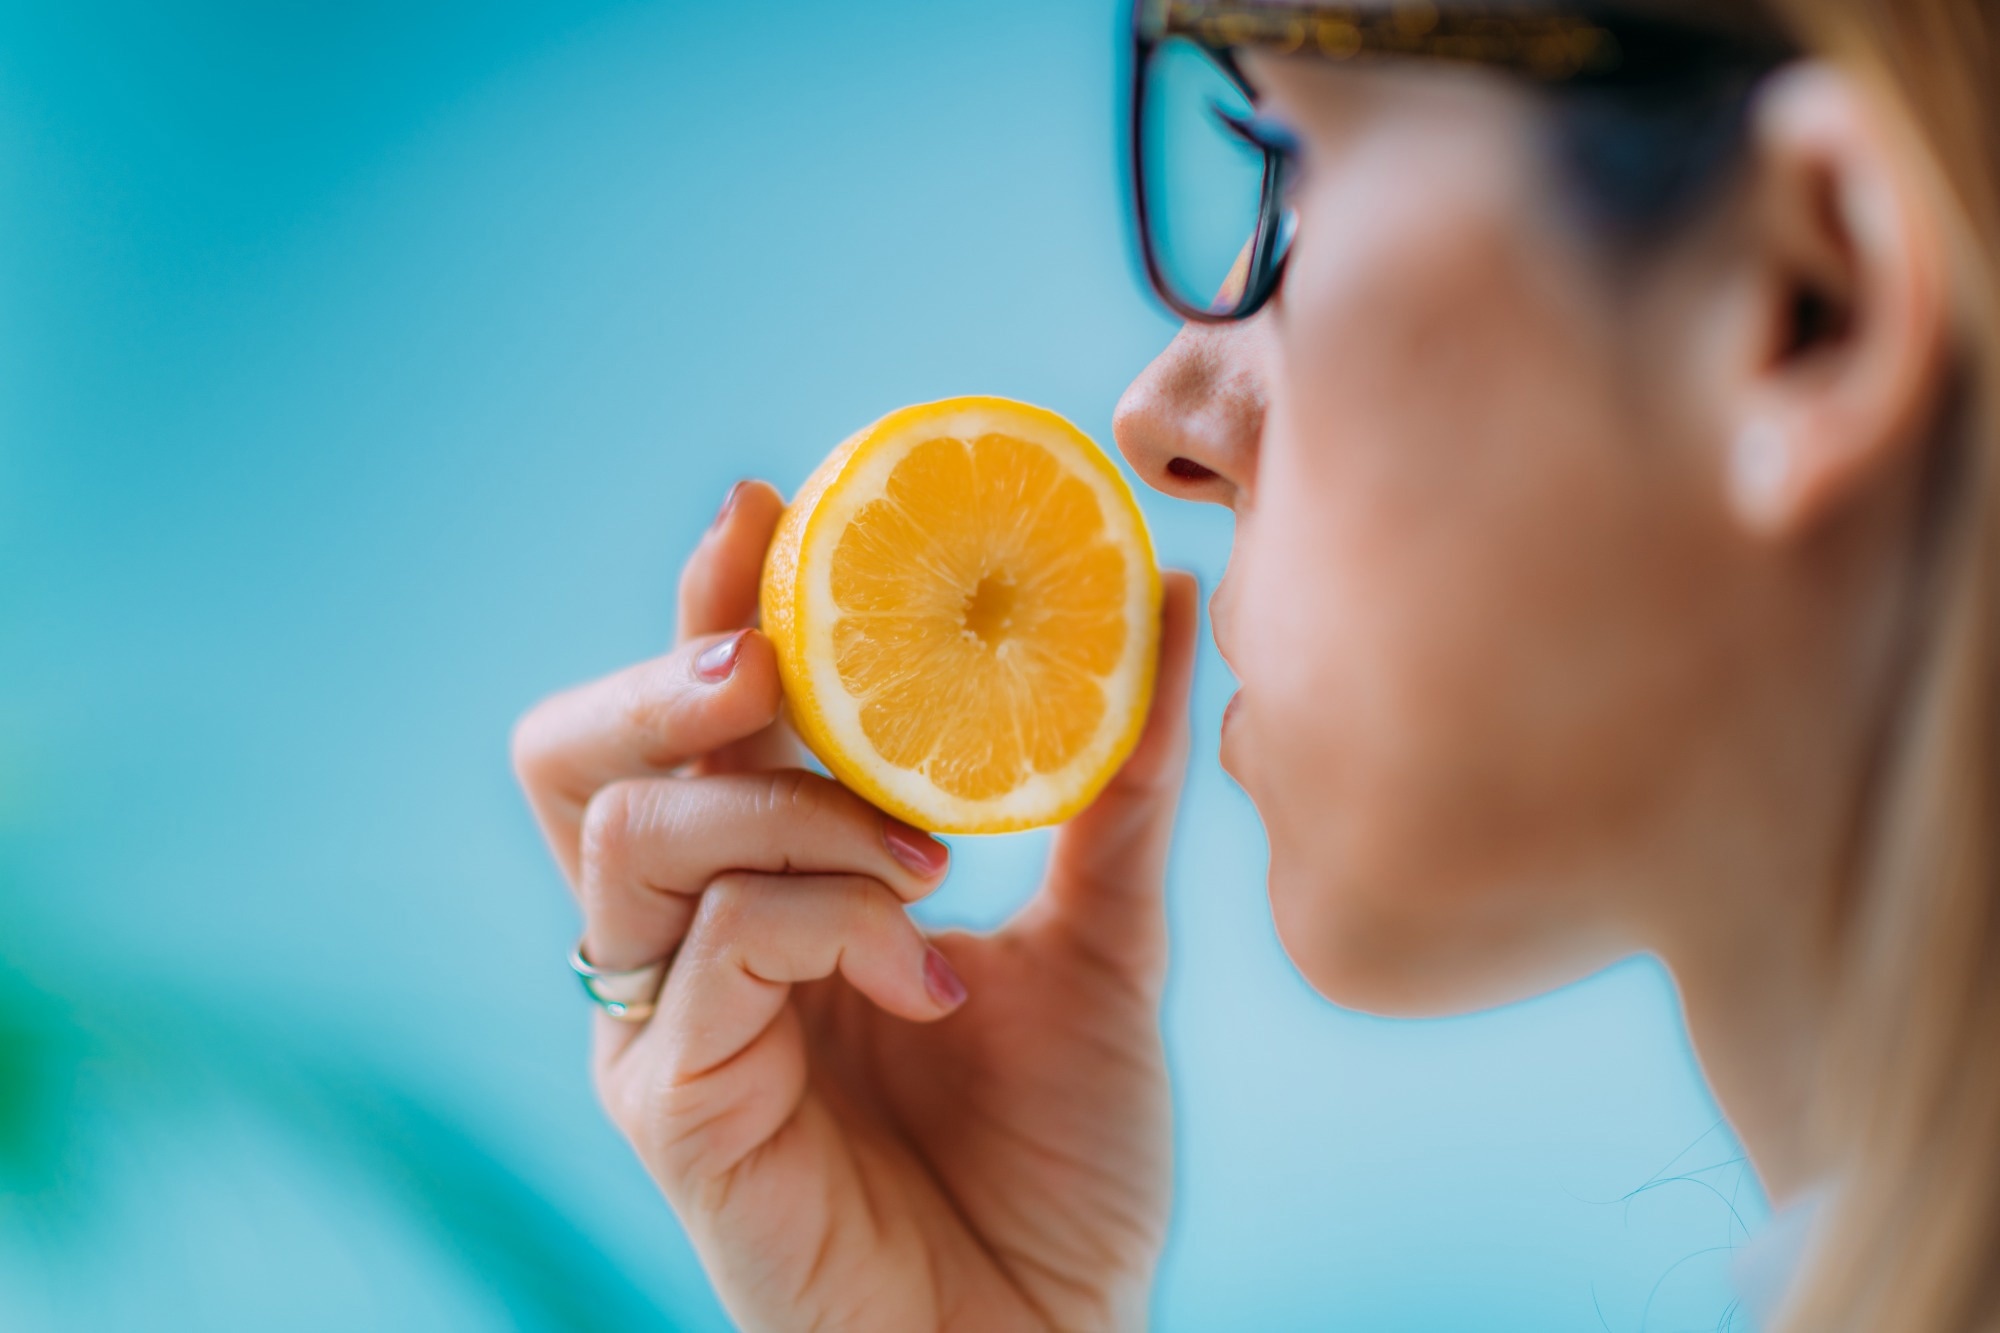 Study: Persisting Olfactory Impairments in Recovered COVID-19 Patient: A Three-Year Follow-Up. Image Credit: Microgen / Shutterstock